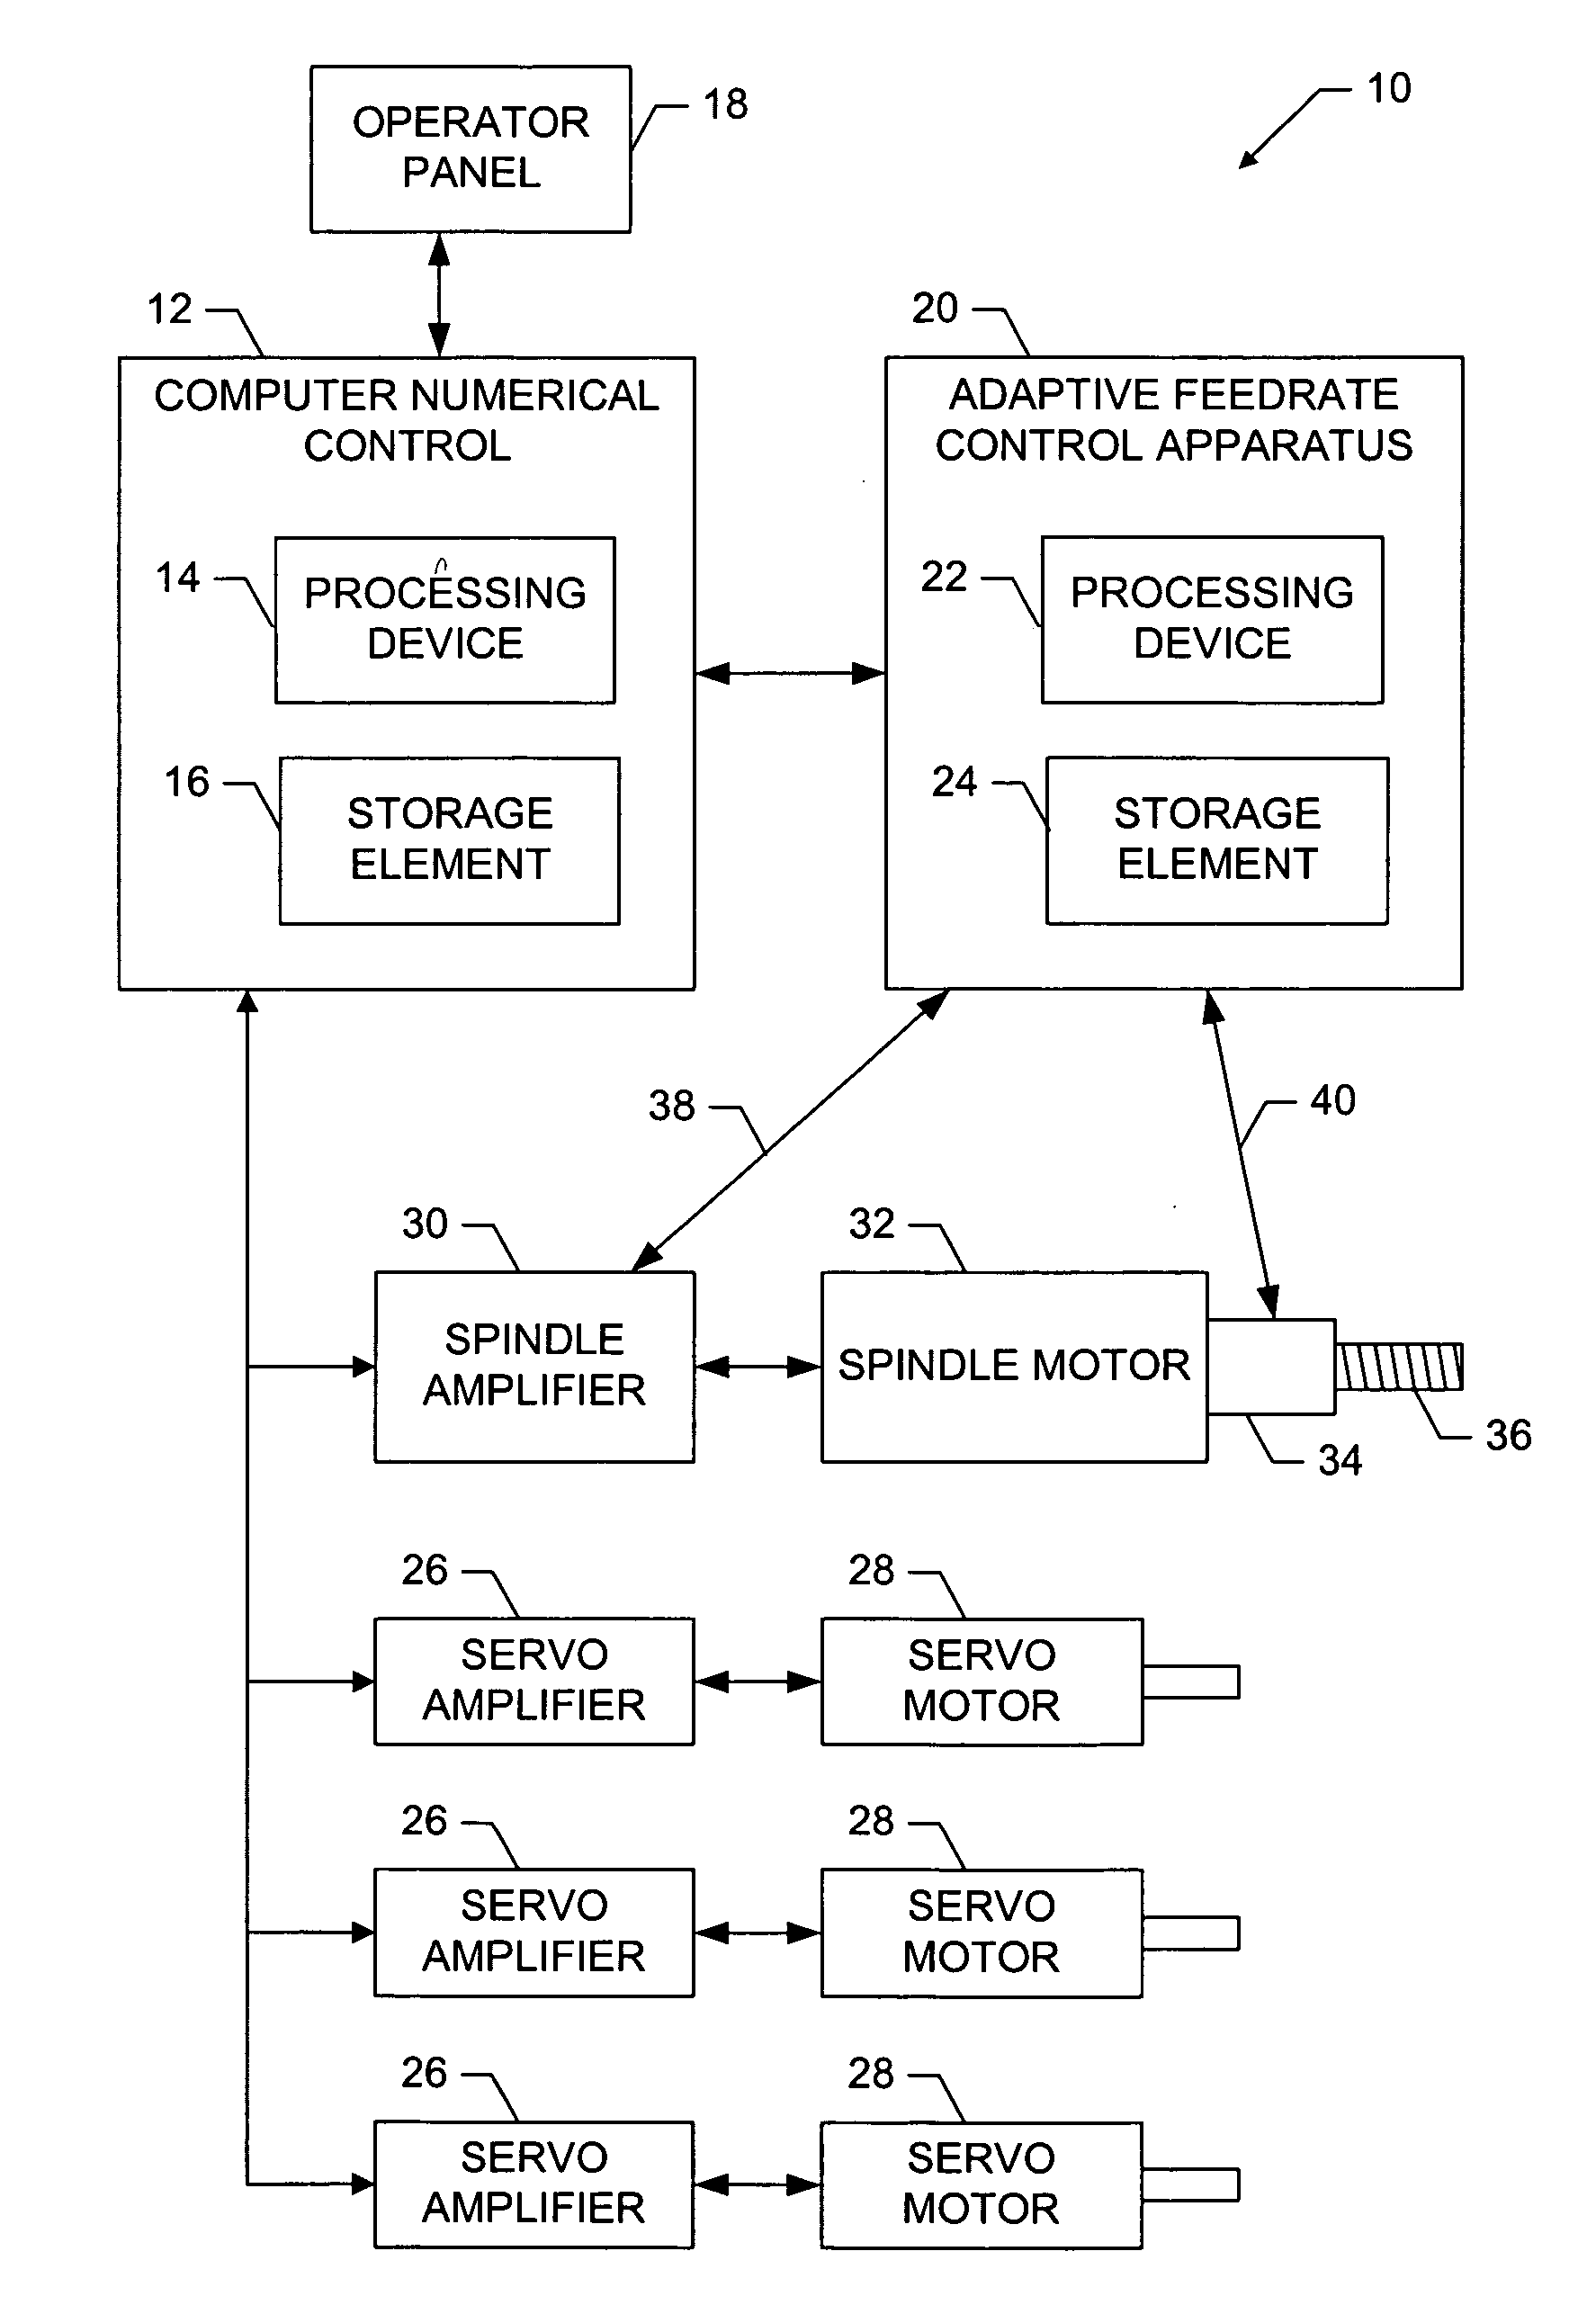 Apparatus for machine tool feedrate override using limiting parameters corresponding to actual spindle speed